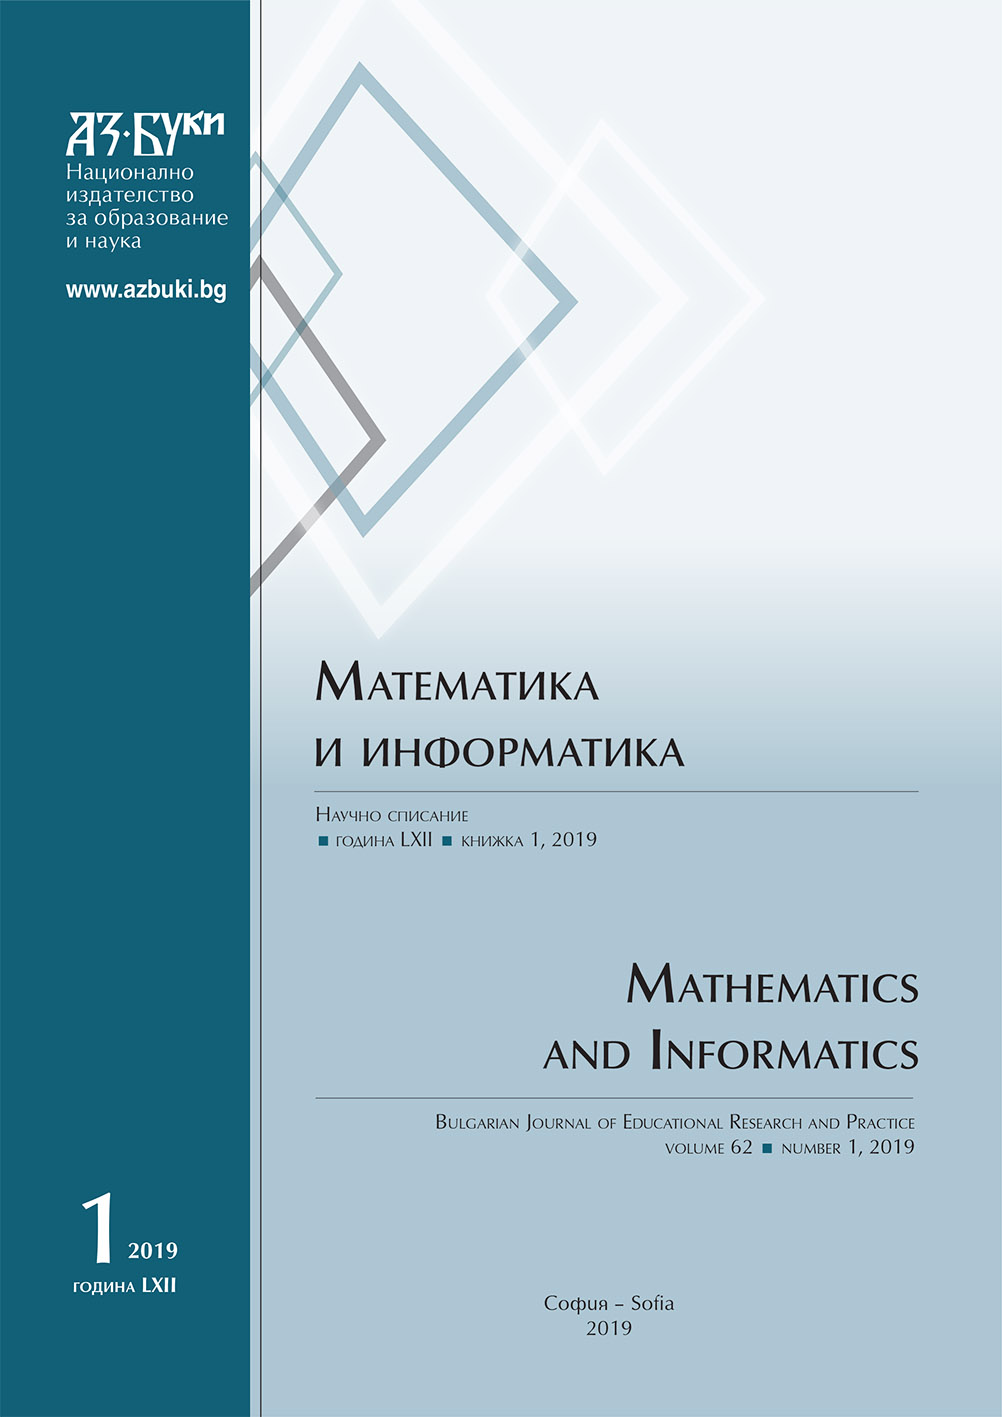 Polynomials of Fourth Degree with Colinear Central Symmetric Roots Cover Image